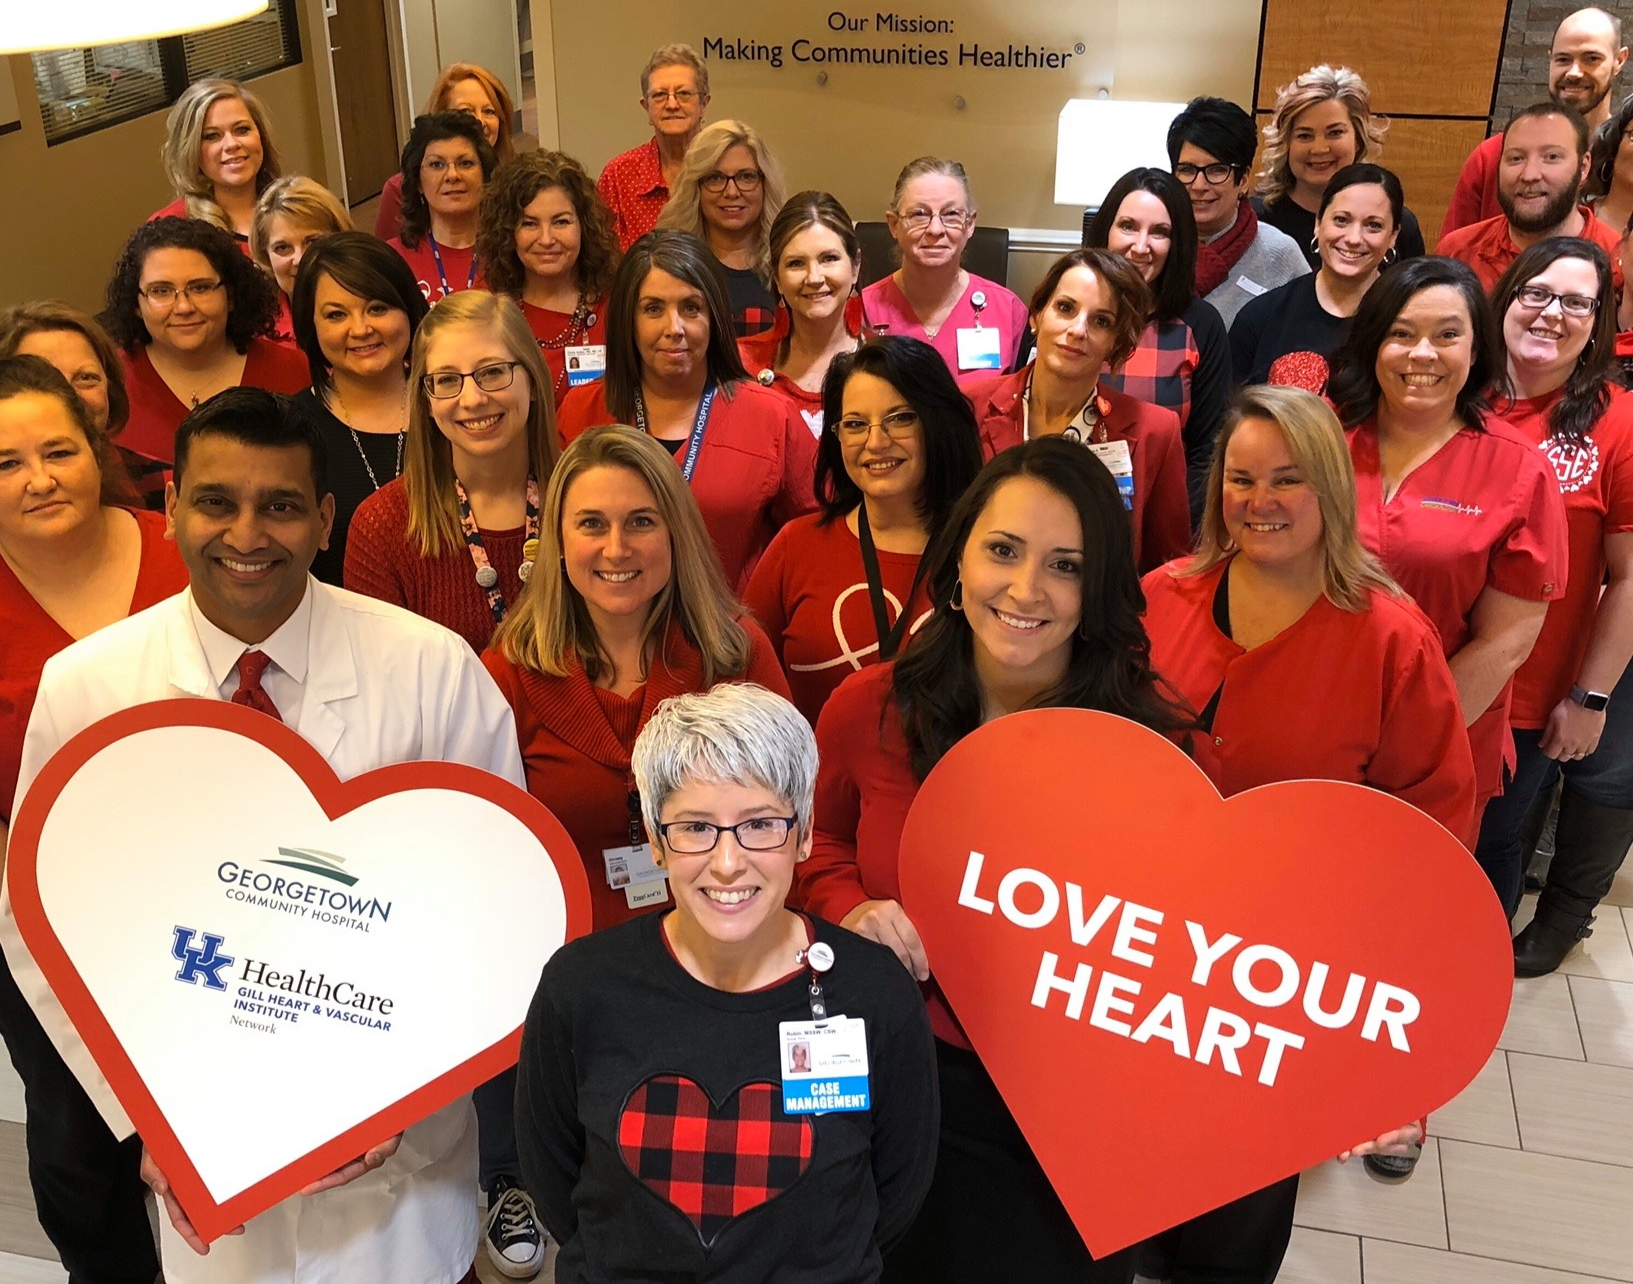 Employees of Georgetown Community Hospital gathered for a photo celebrating heart health.